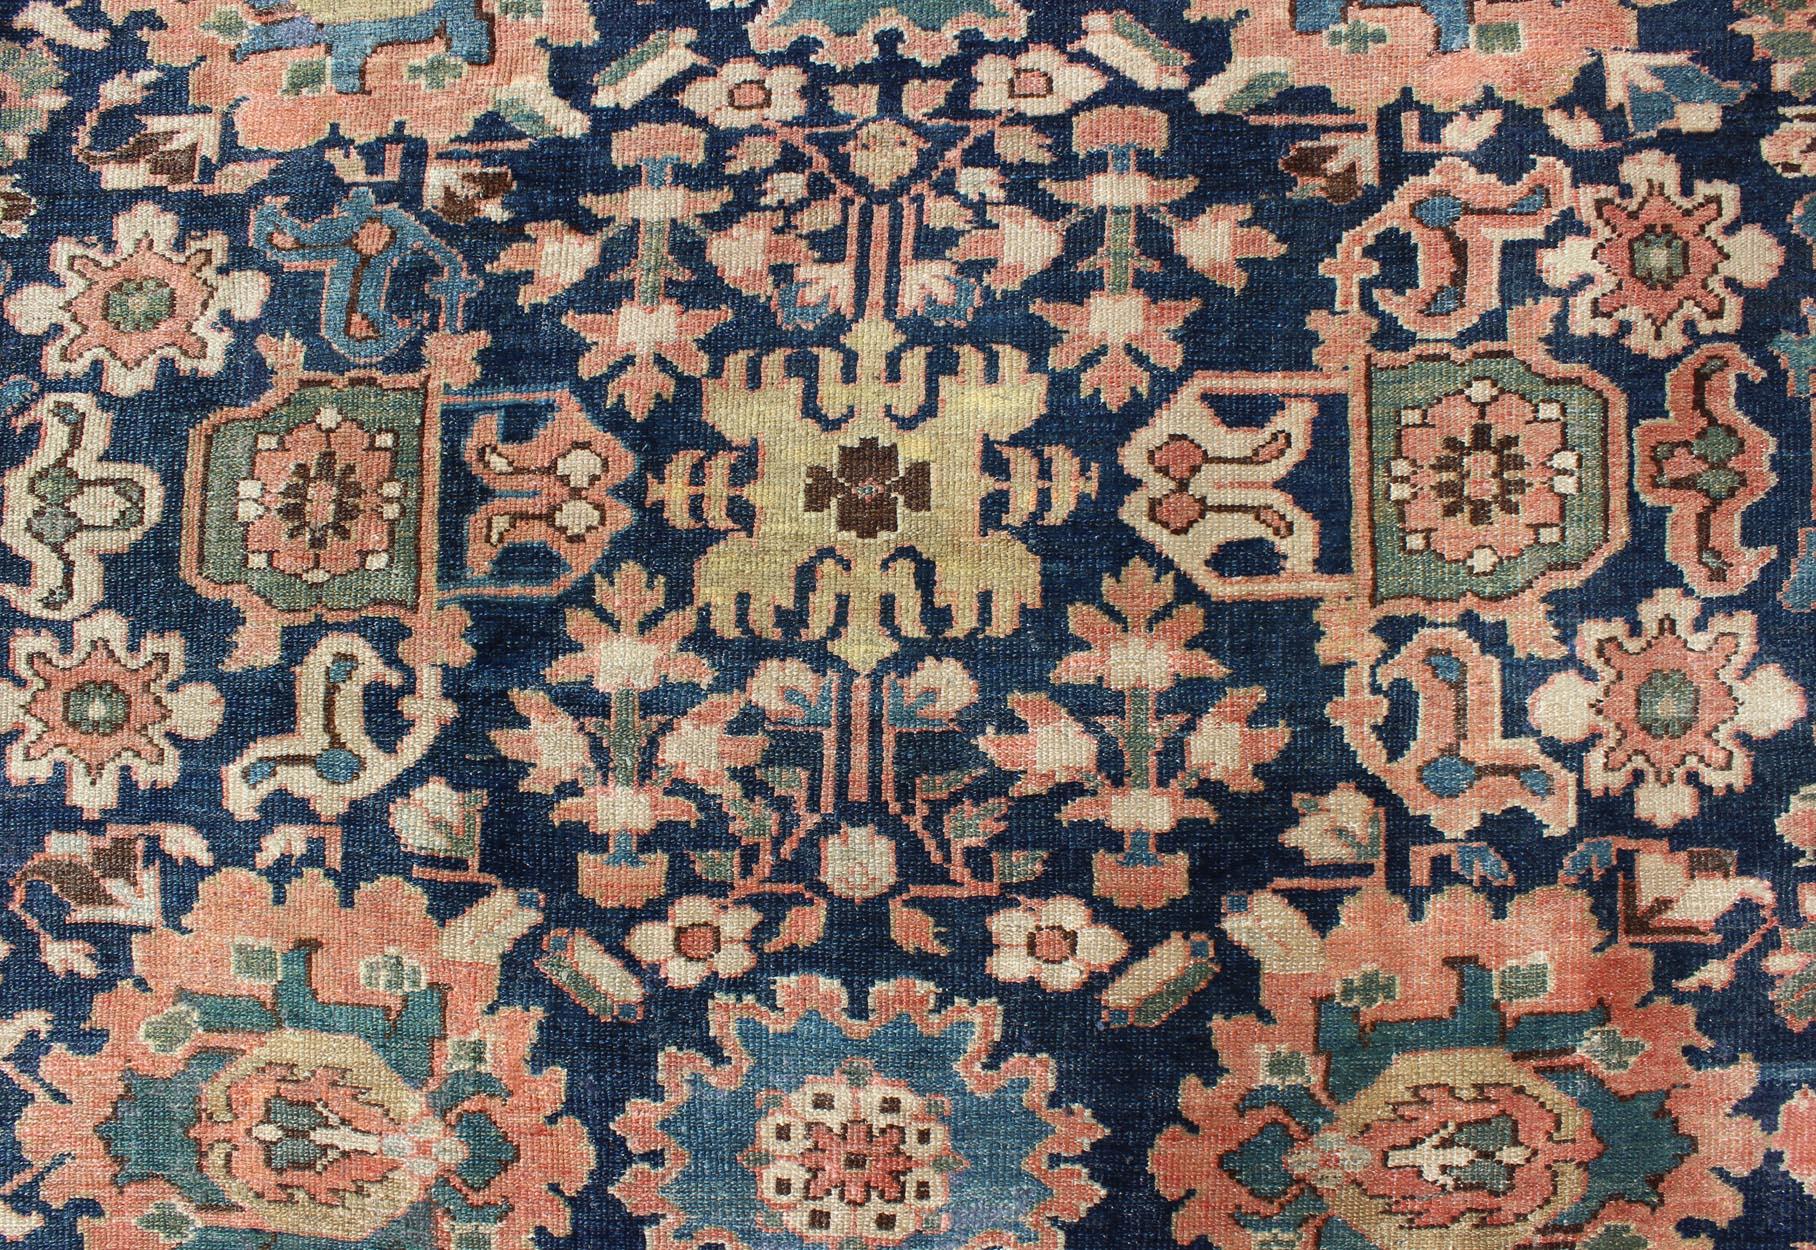 Very Large Antique Persian Hamedan Rug with Blossom Design in Blue Background For Sale 6